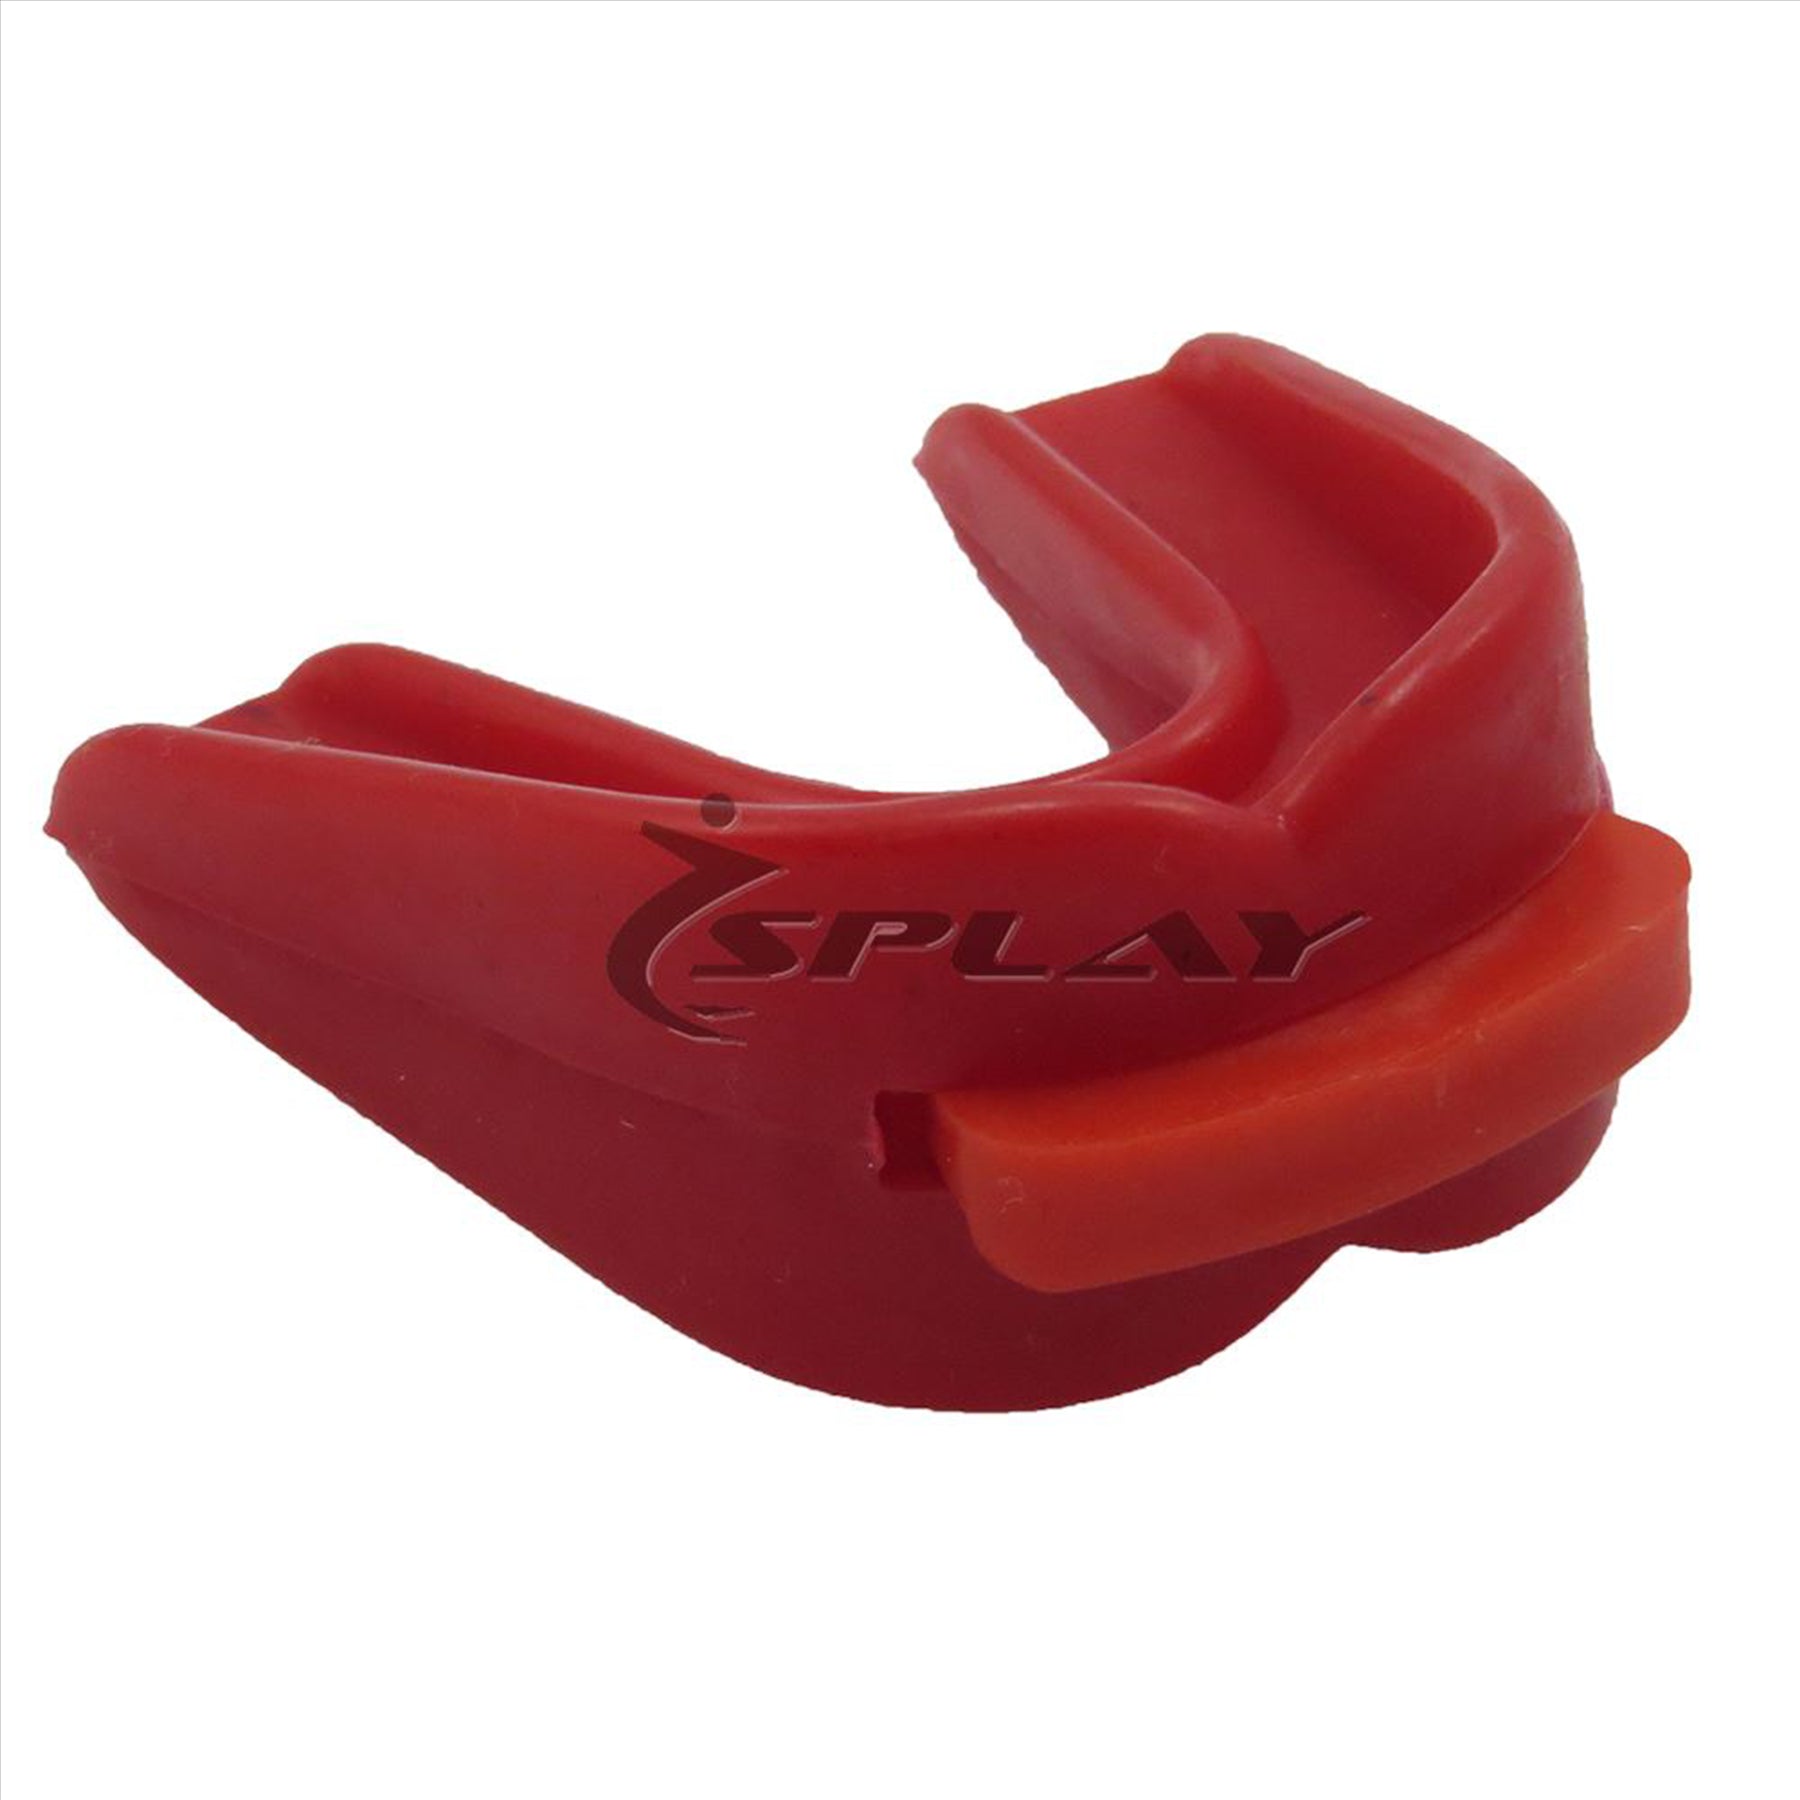 Buy Mouth guard Double Impression-Mouth Guard-Splay (UK) Limited-Large-Red-Splay UK Online